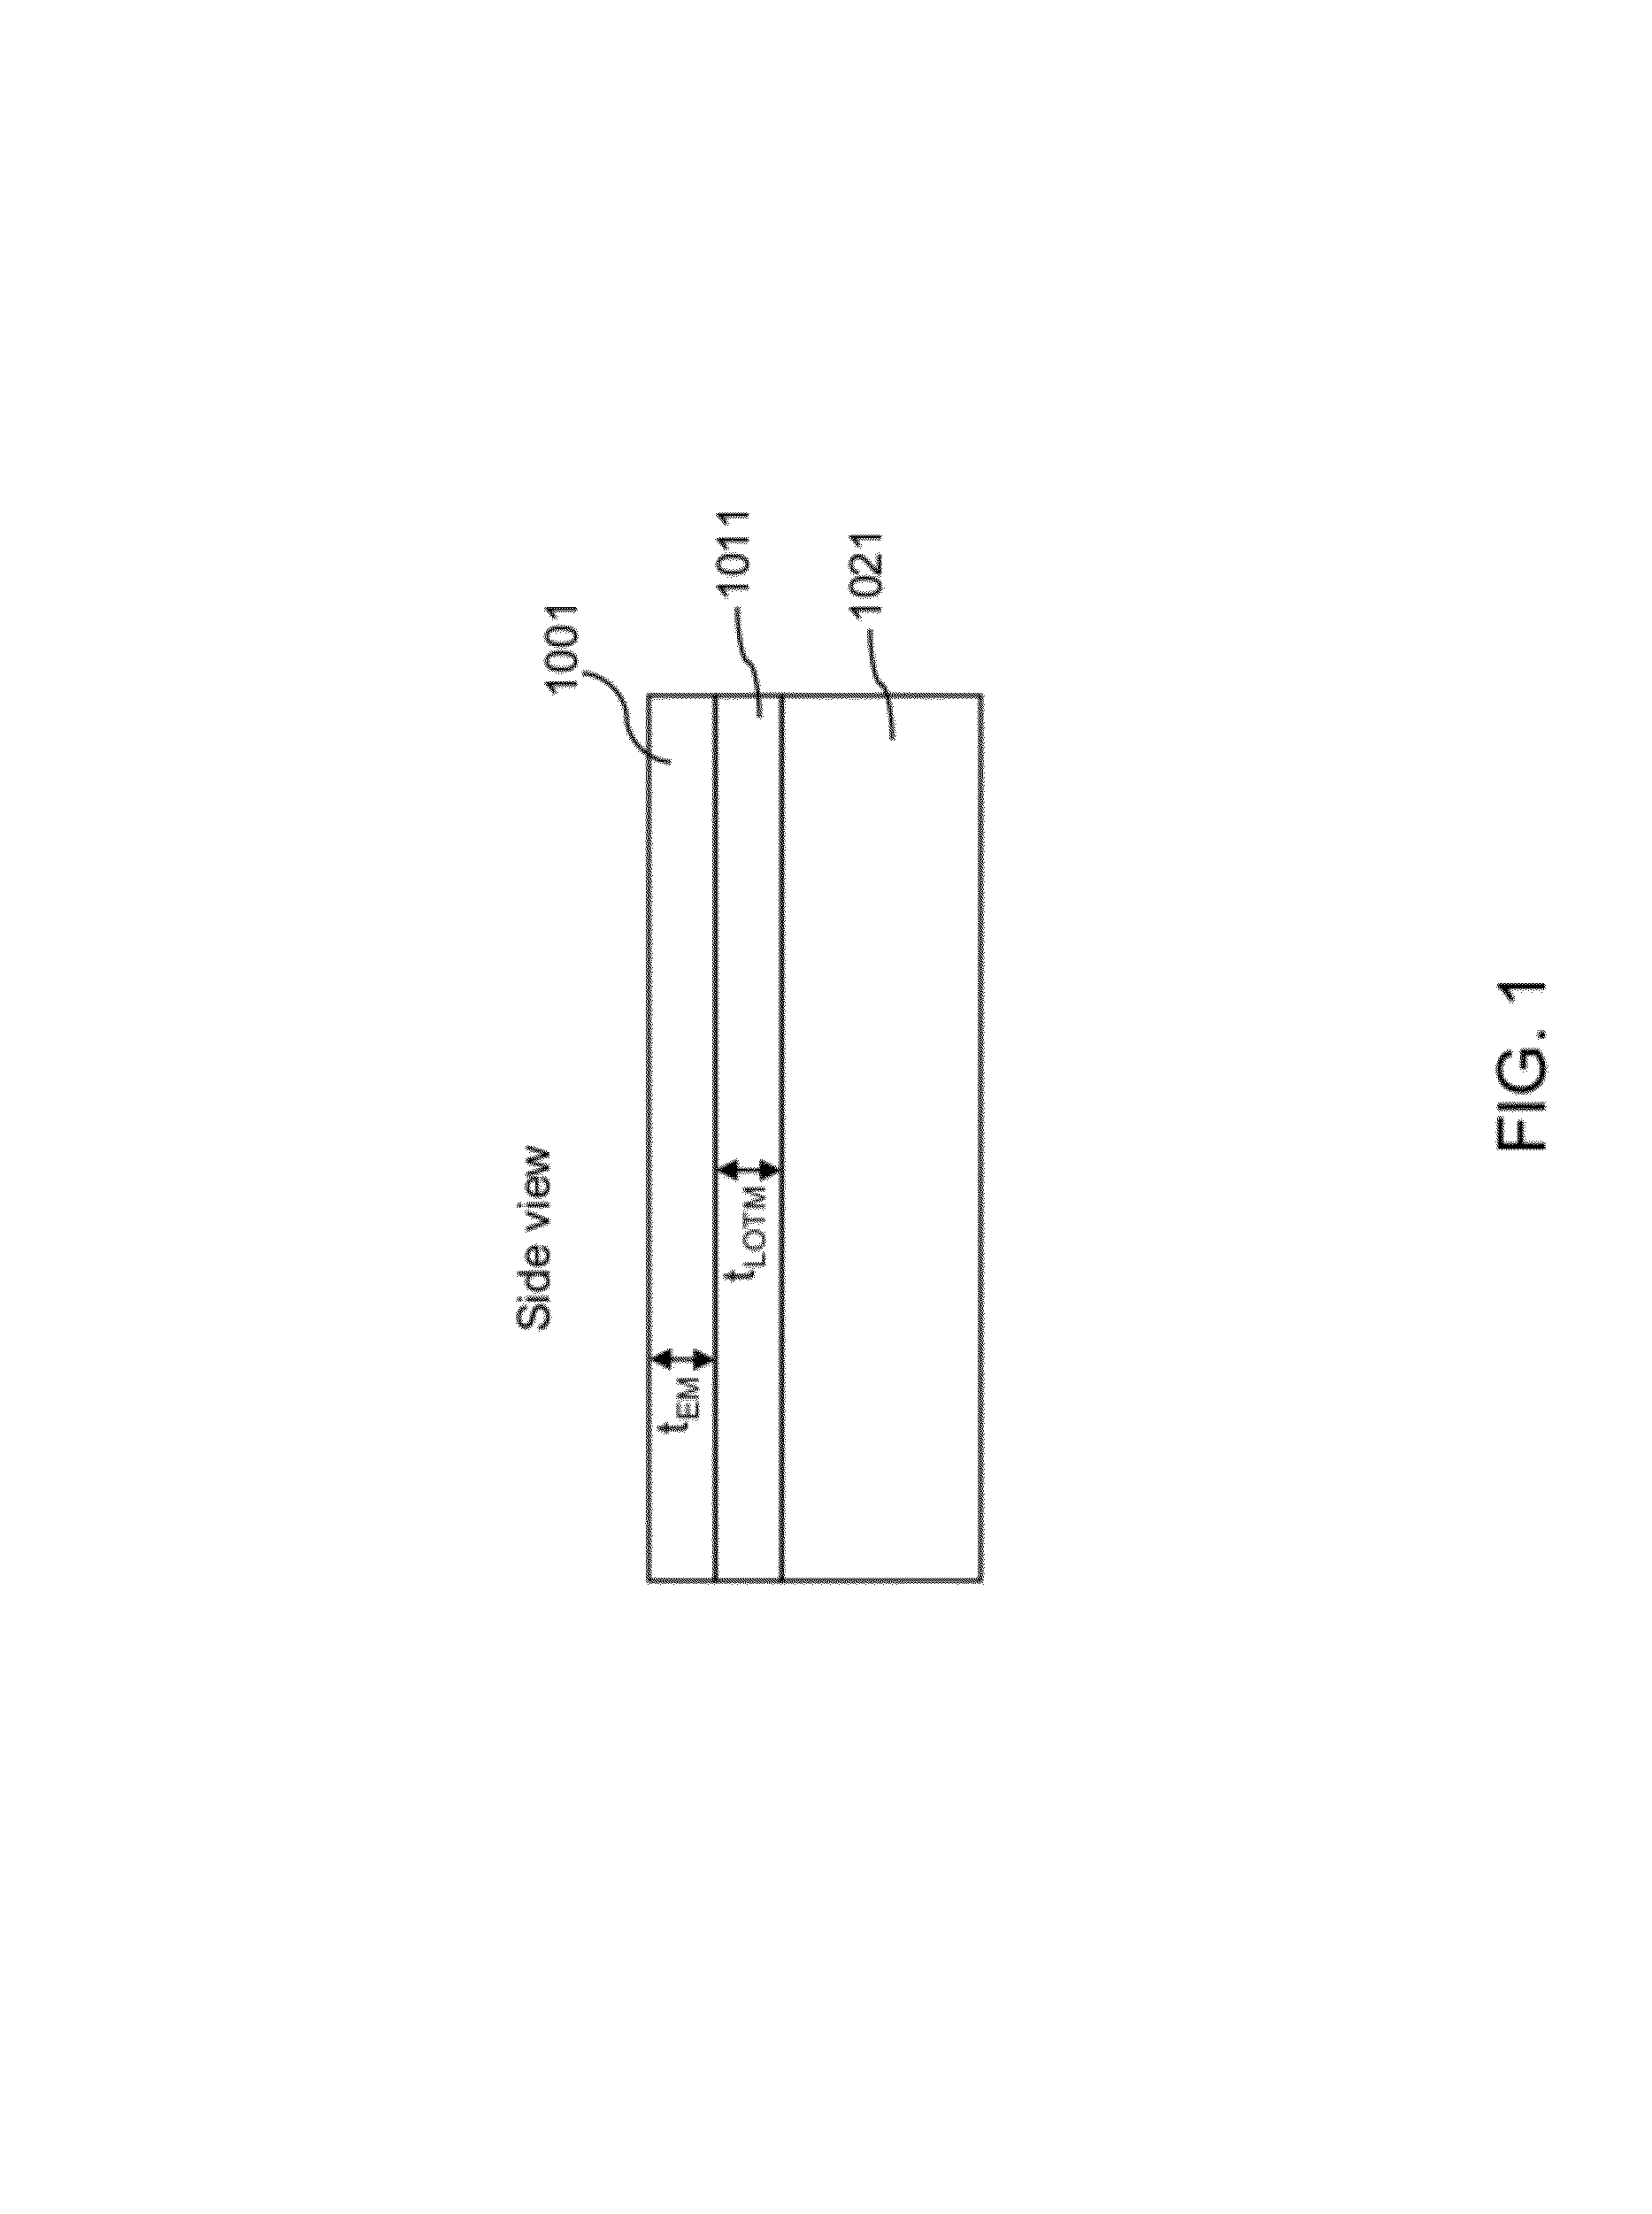 Electronic-integration compatible photonic integrated circuit and method for fabricating electronic-integration compatible photonic integrated circuit